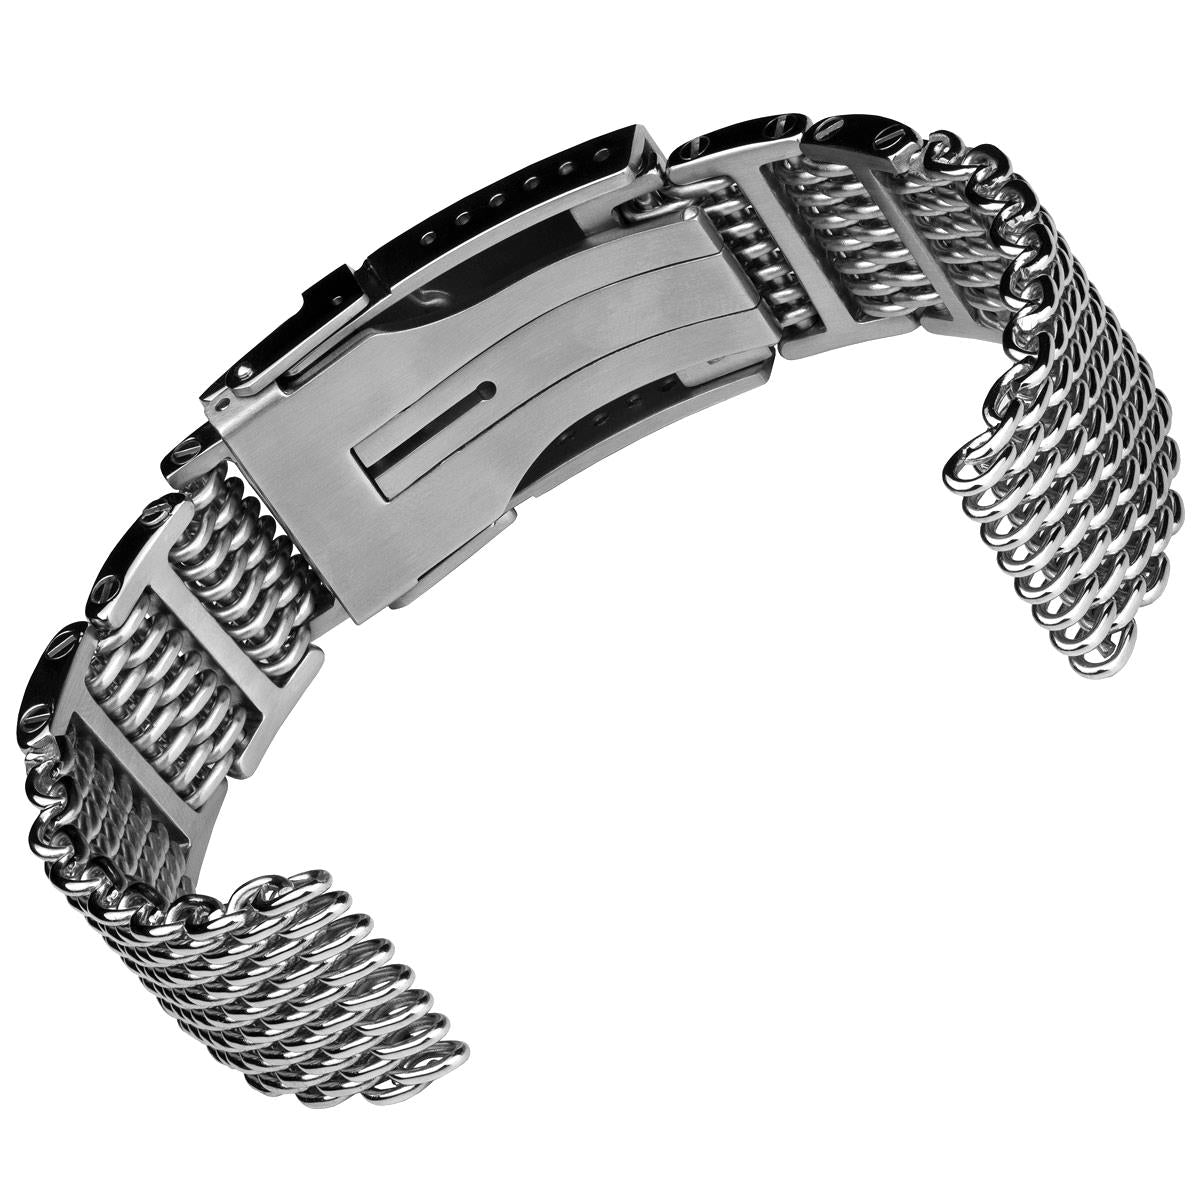 ZULUDIVER Shark Mesh Stainless Steel 20mm - additional image 2